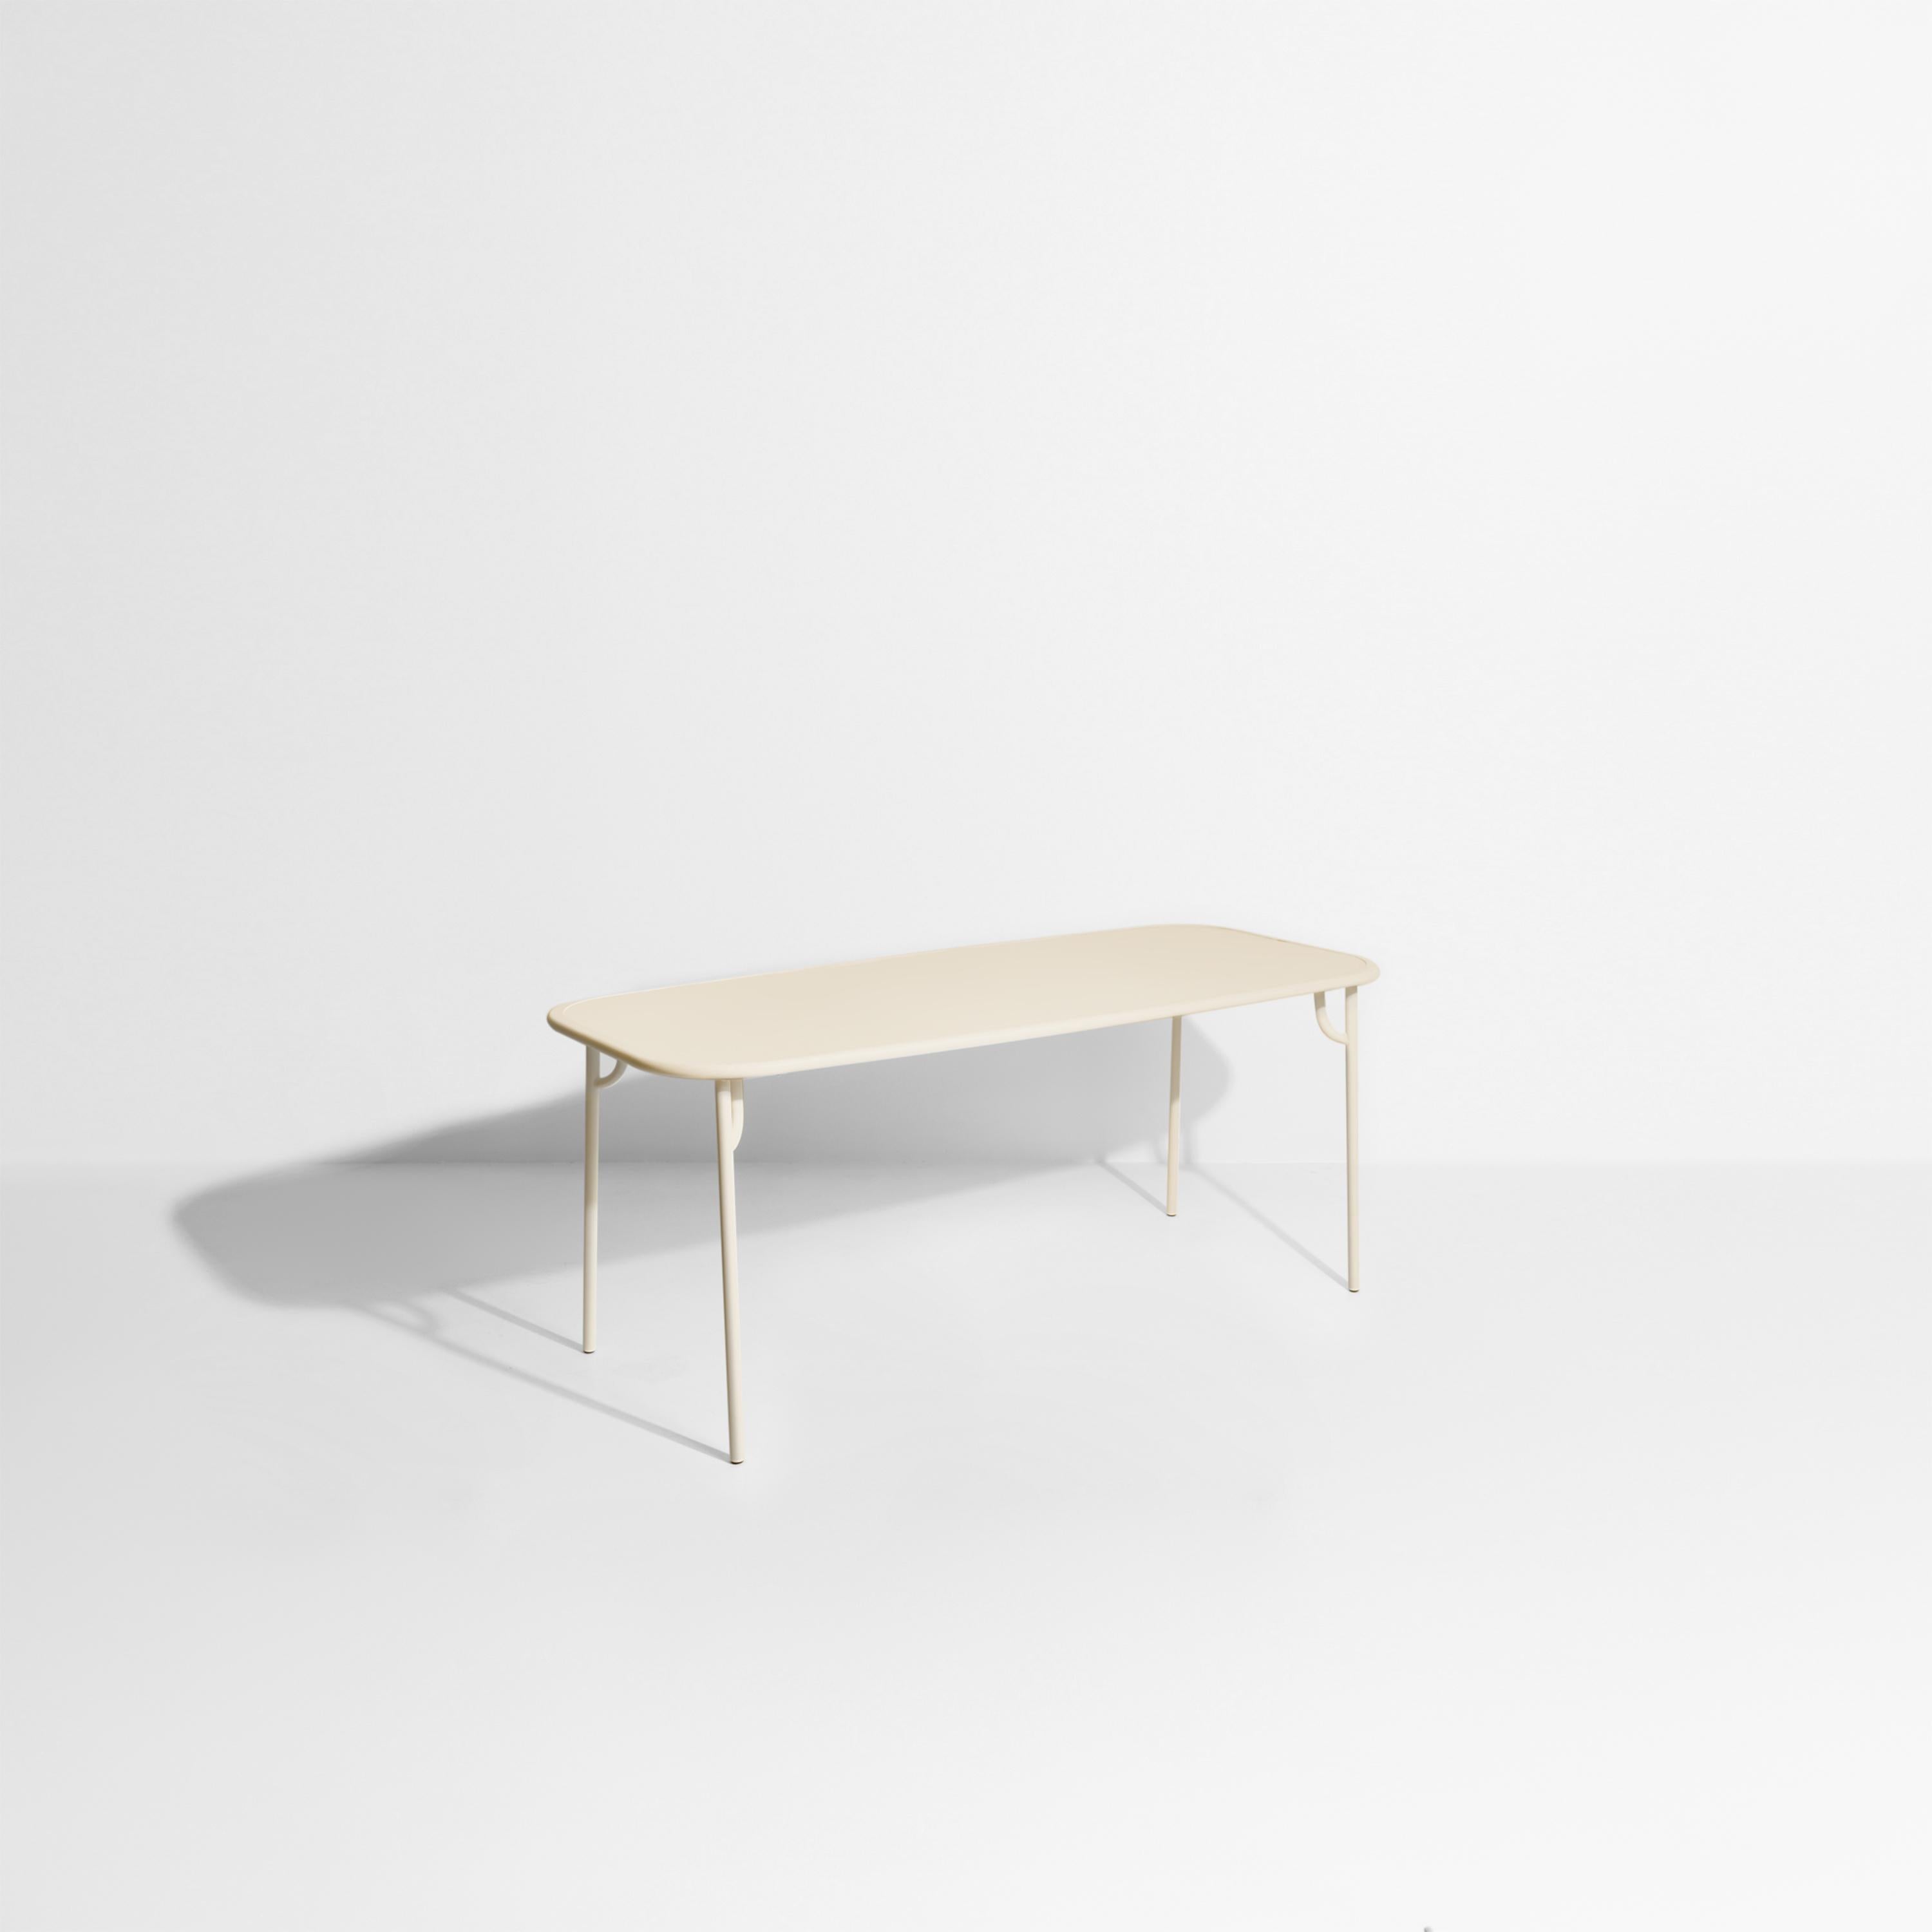 Petite Friture Week-End Medium Plain Rectangular Dining Table in Ivory Aluminium by Studio BrichetZiegler, 2017

The week-end collection is a full range of outdoor furniture, in aluminium grained epoxy paint, matt finish, that includes 18